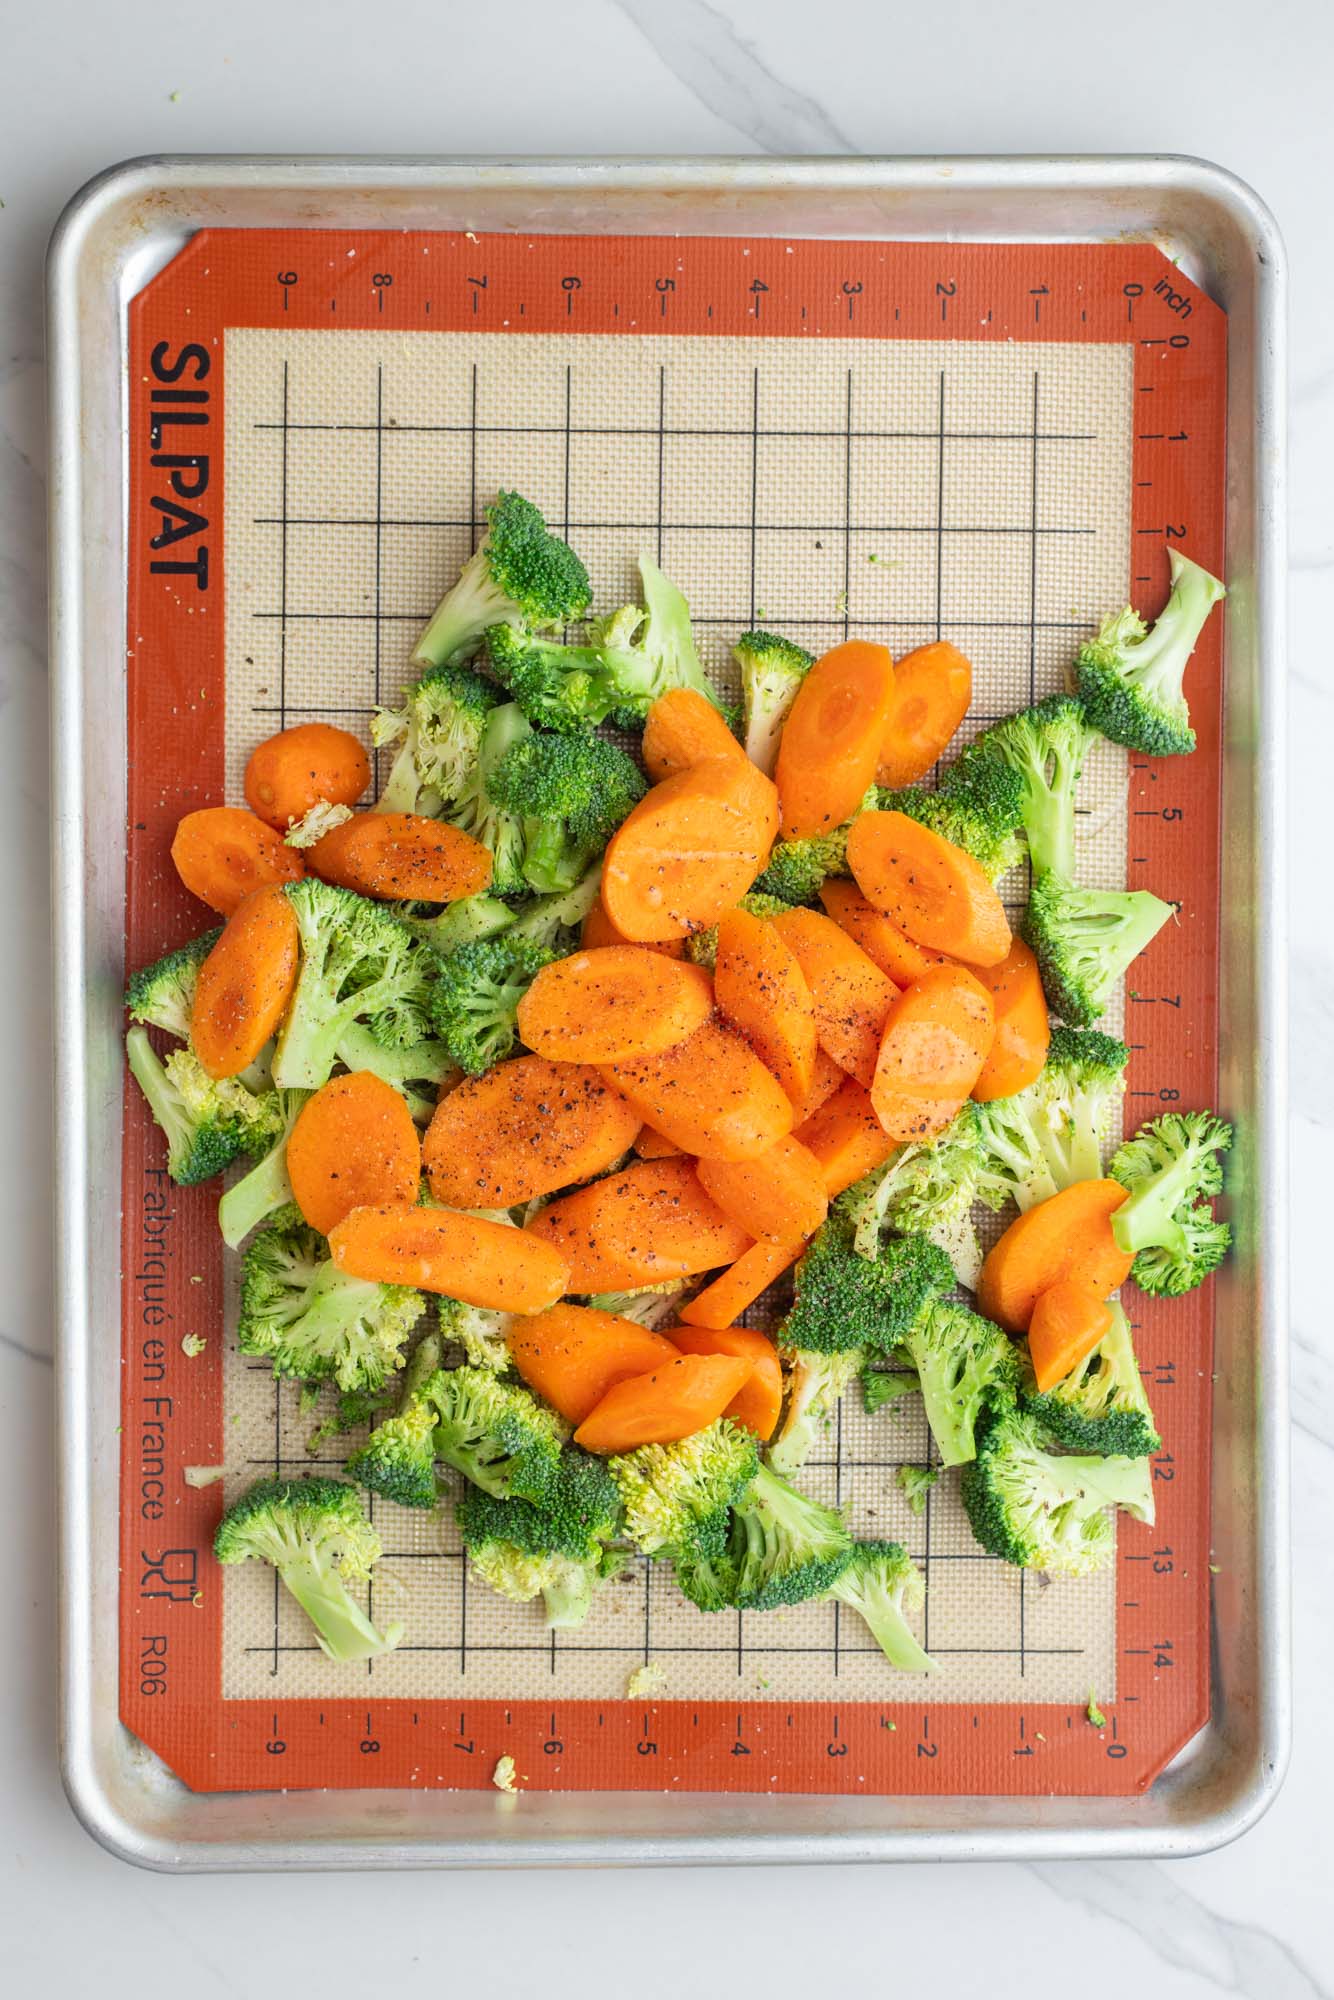 raw sliced carrots and broccoli on a silpat lined baking sheet, seasoned with salt and pepper.